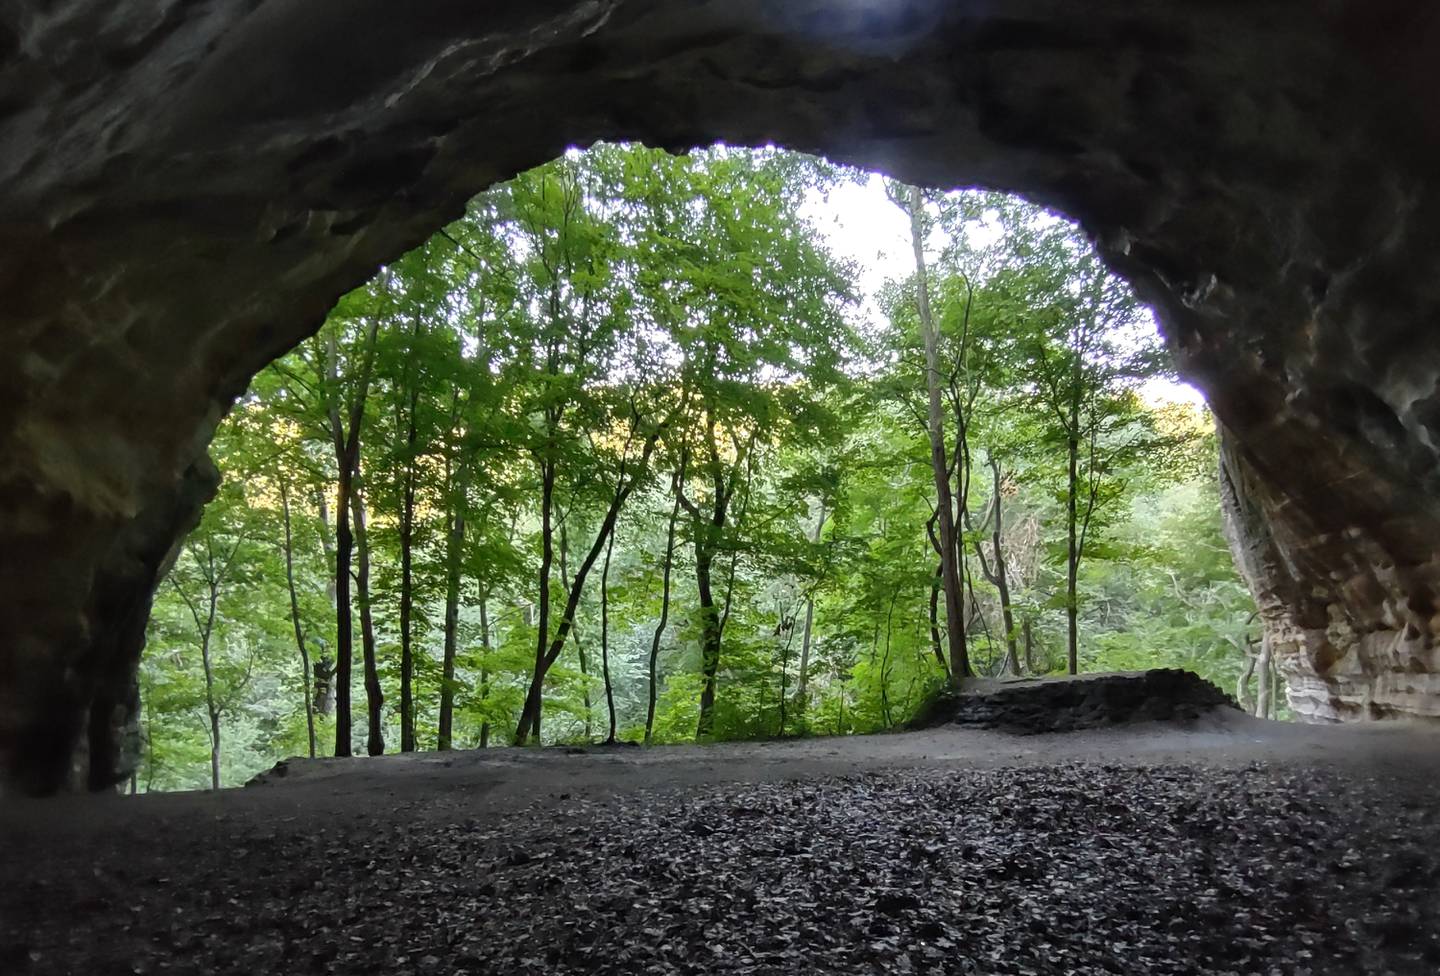 Hikers who stand beneath Council Overhang at Starved Rock State Park can look out to a wooded view beyond.